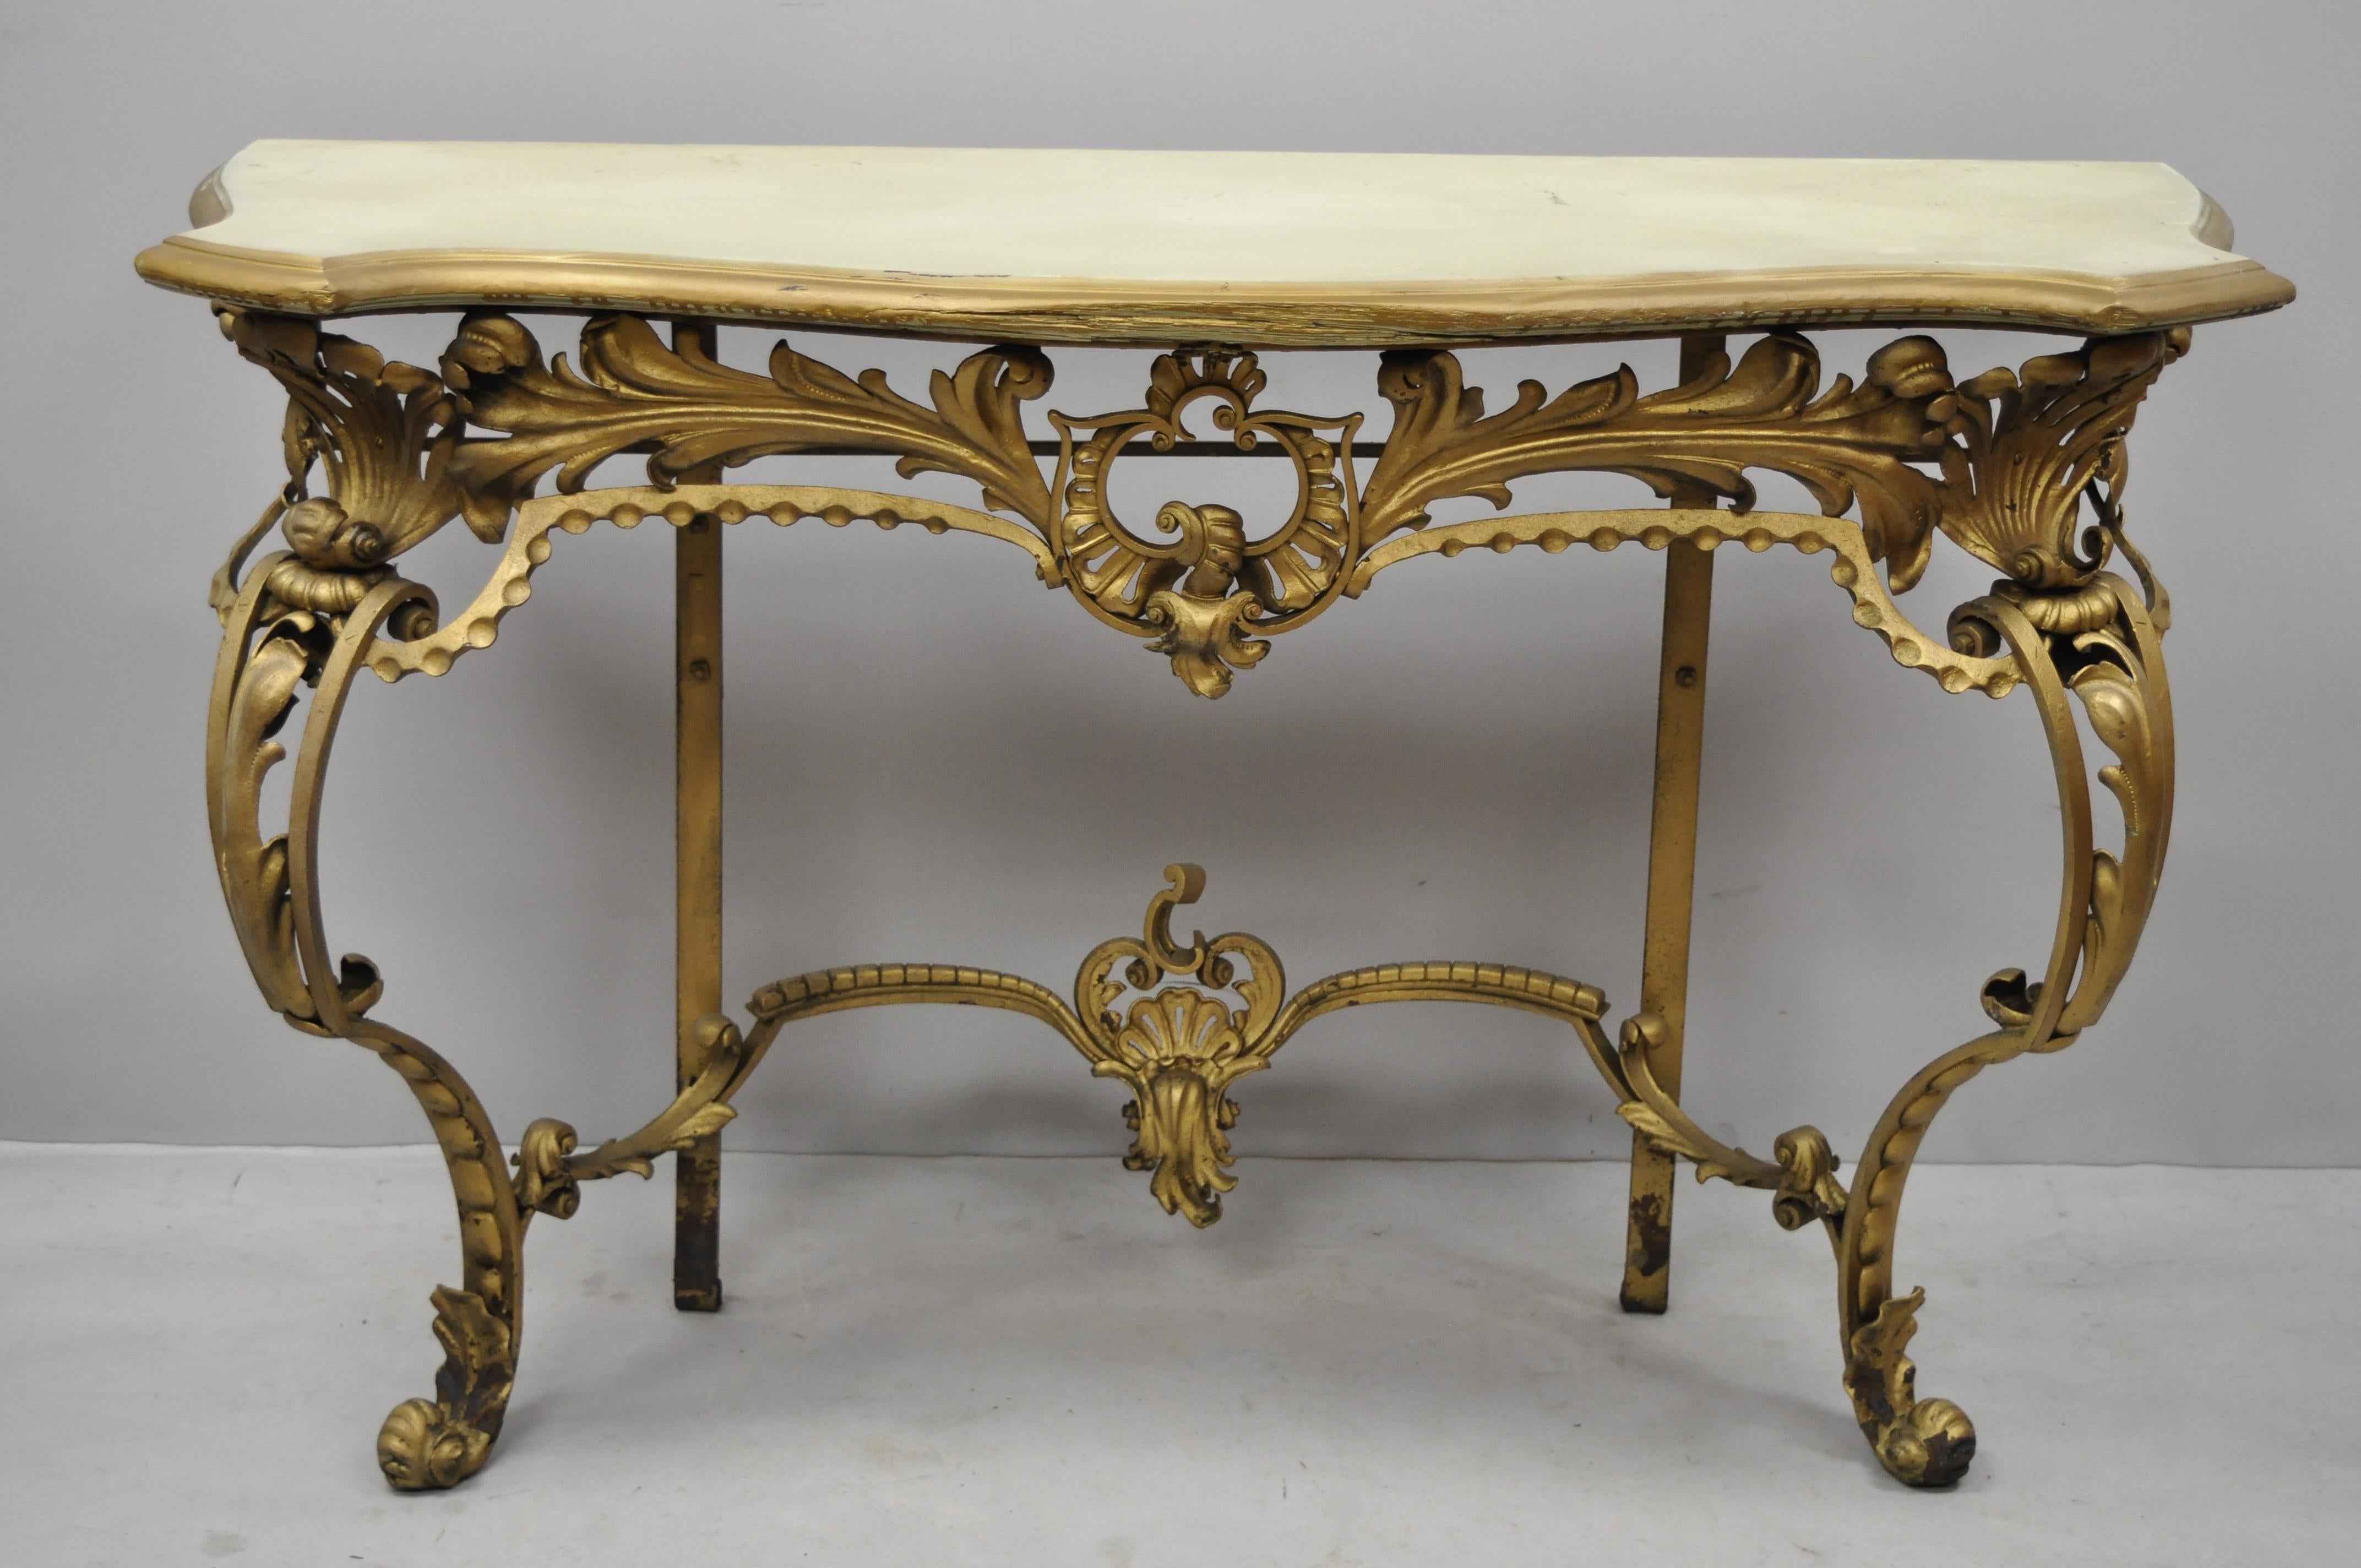 Antique French Louis XV style Art Nouveau console table with wooden top. Item features solid wood serpentine top, wrought iron base, floral scrollwork, very nice antique item, quality craftsmanship, circa 1900. Measurements: 33